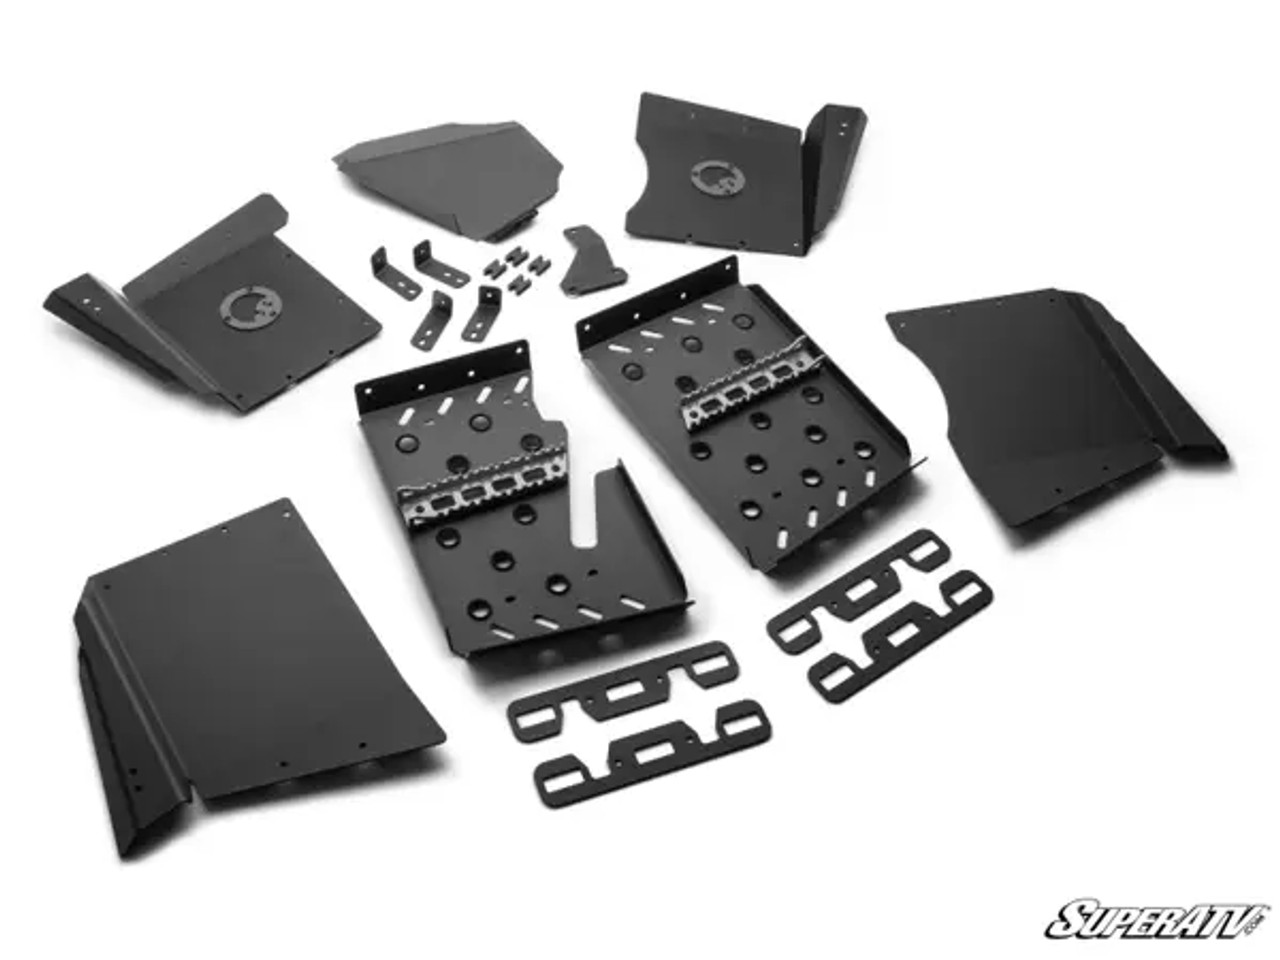 CAN-AM OUTLANDER FOOTWELLS Product kit